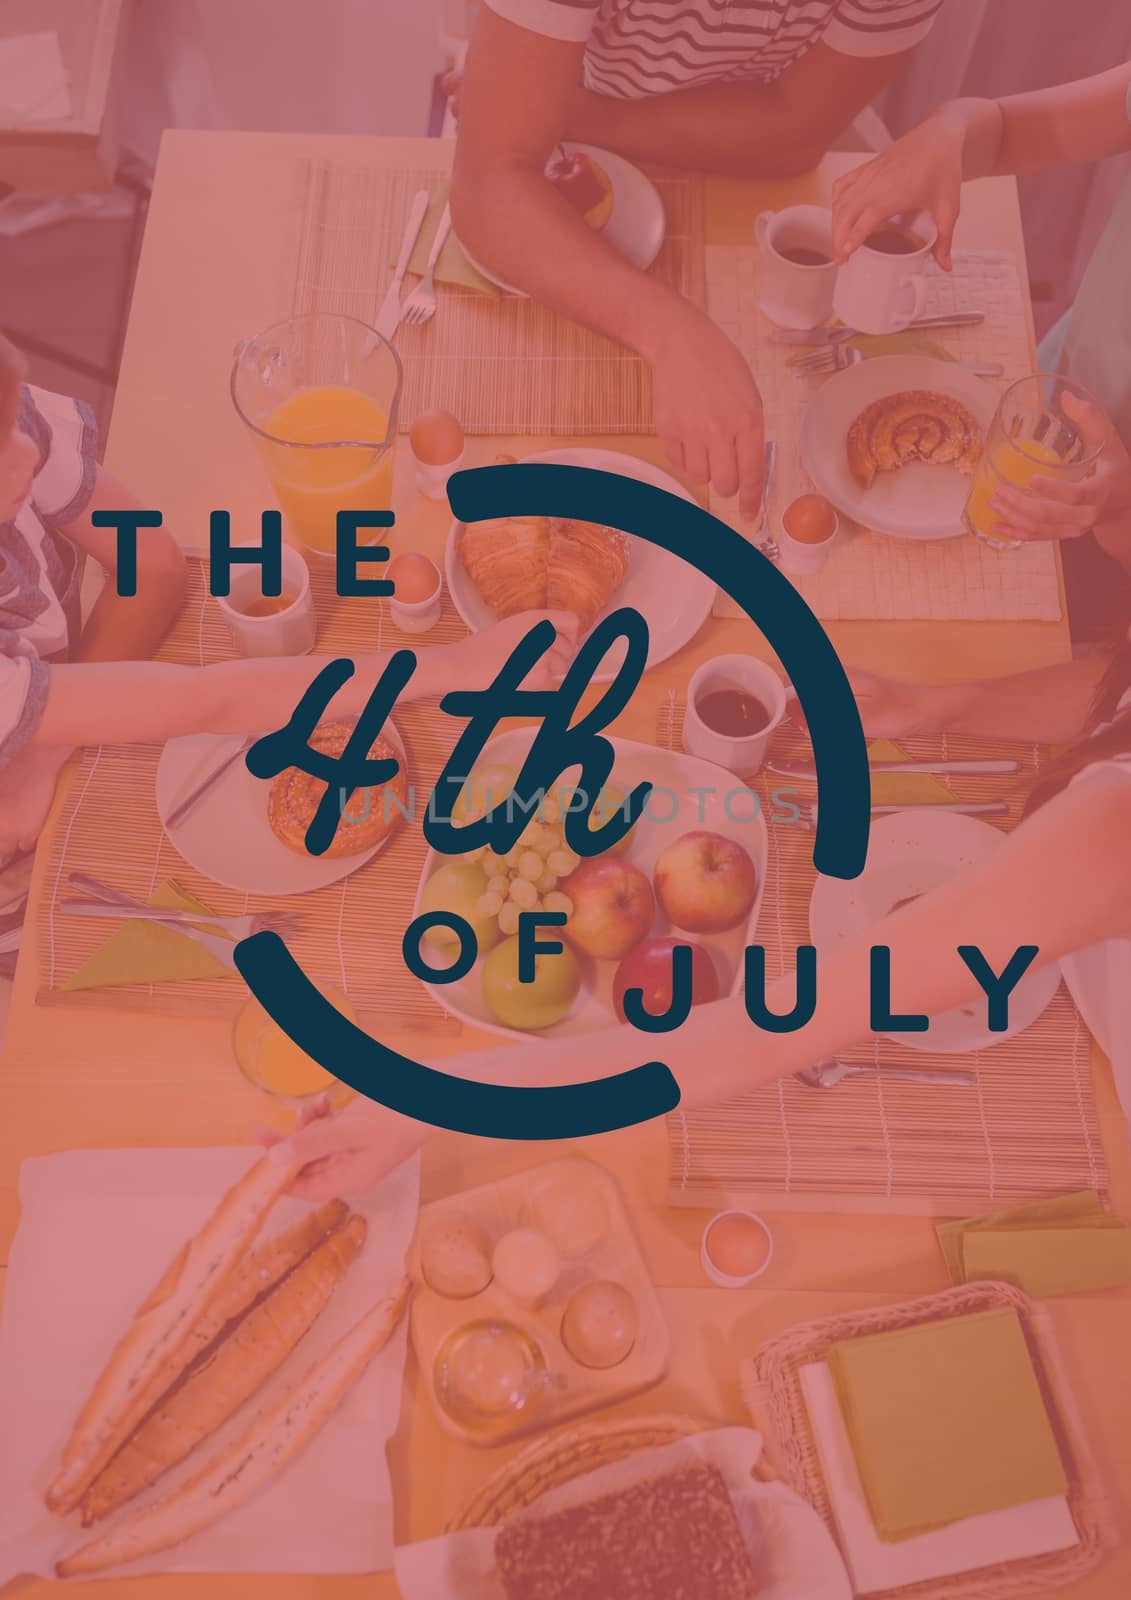 Digital composite of Fourth of July graphic against overhead of family at table with red overlay